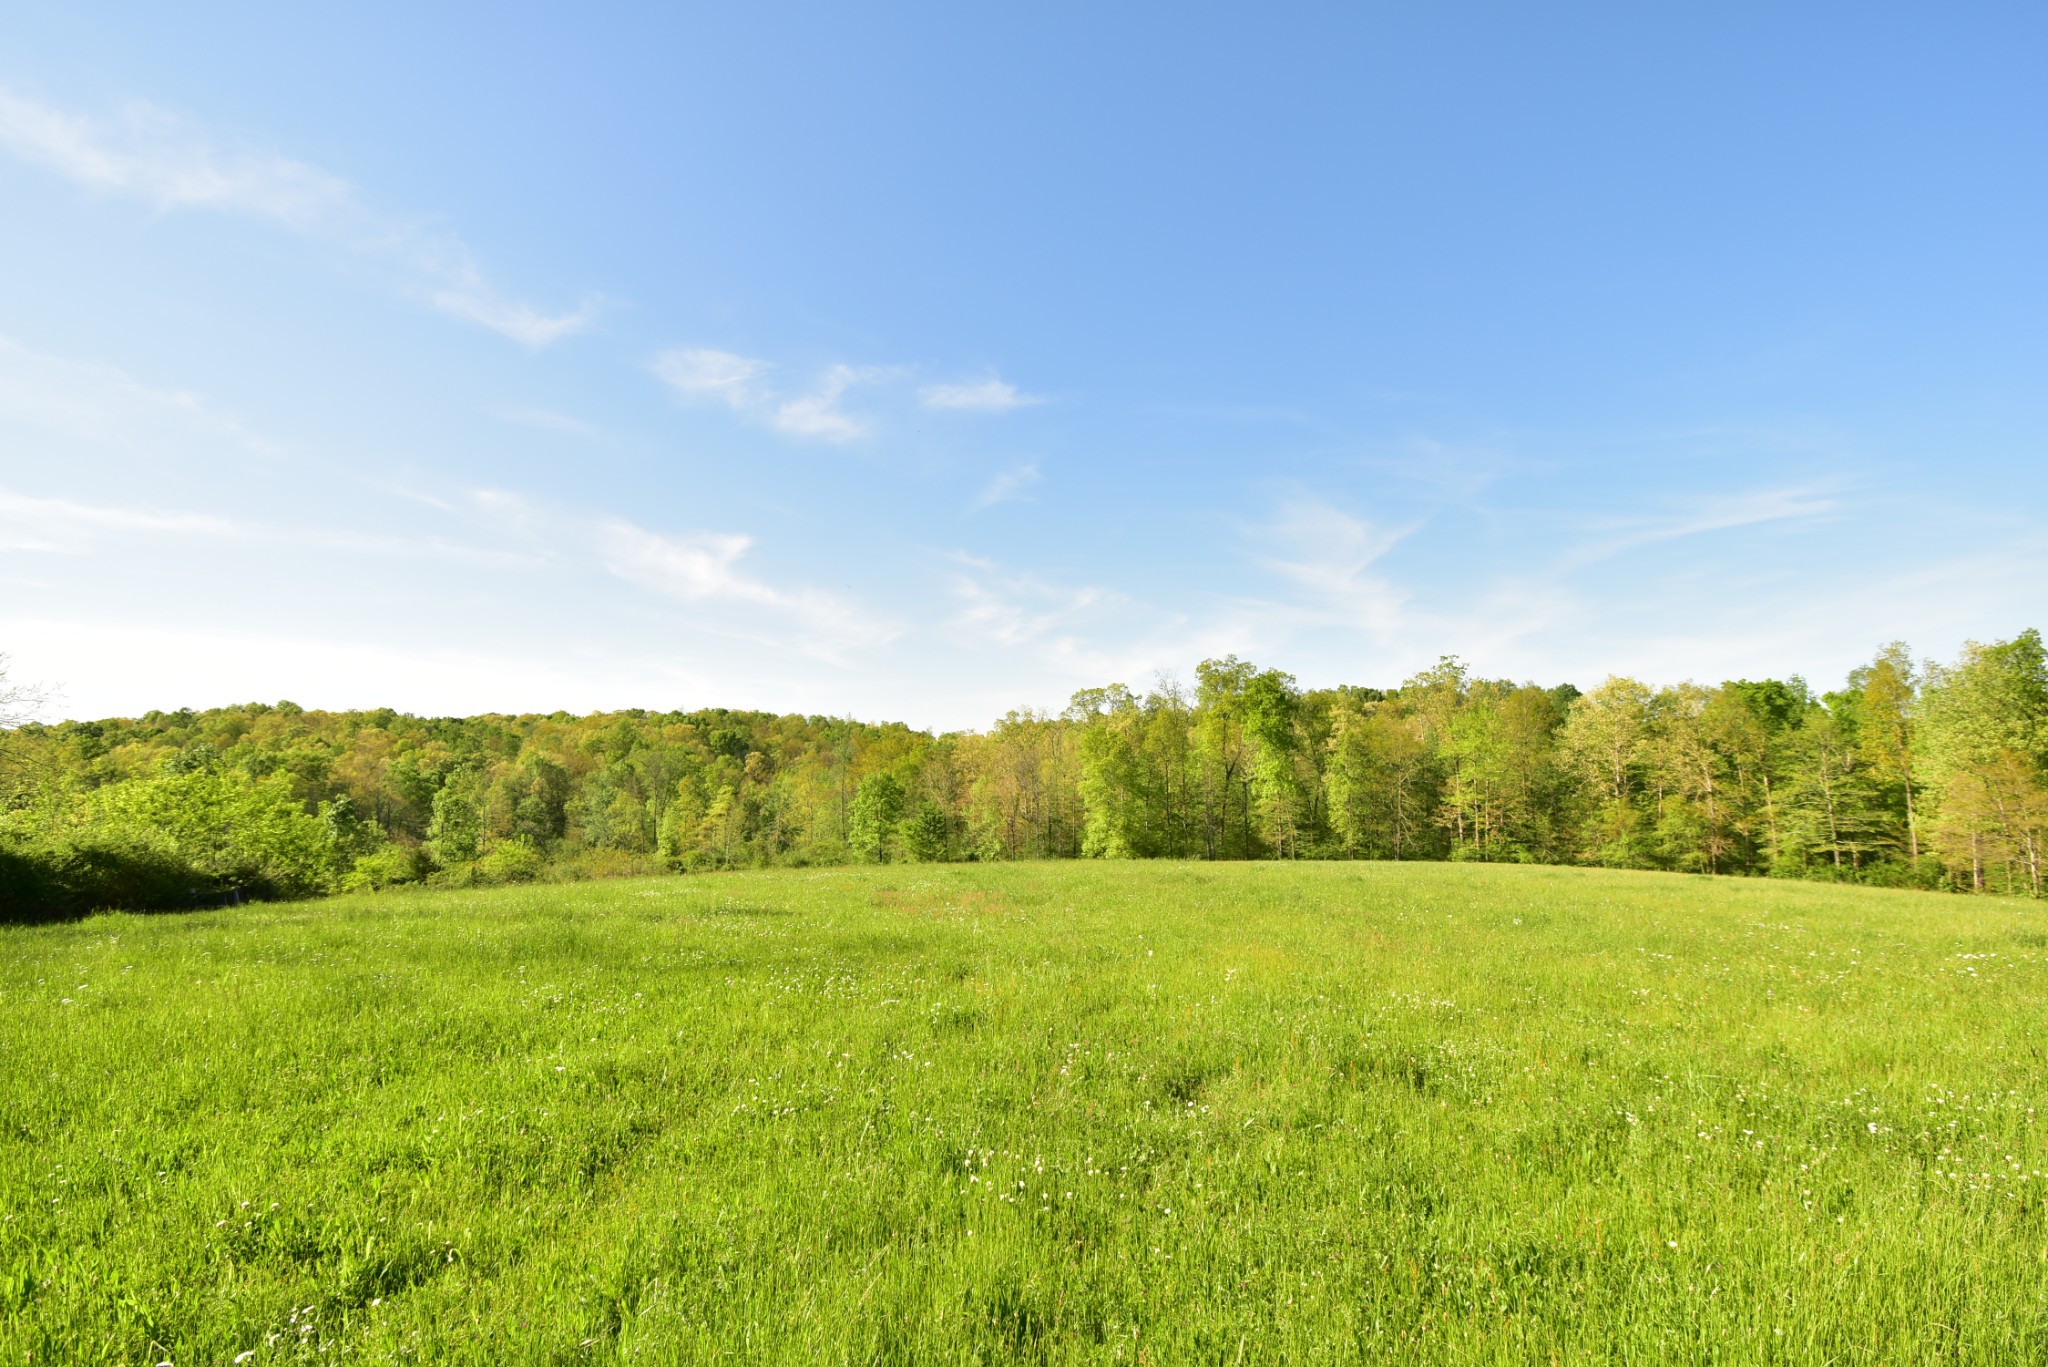 a view of a green field with trees in the background